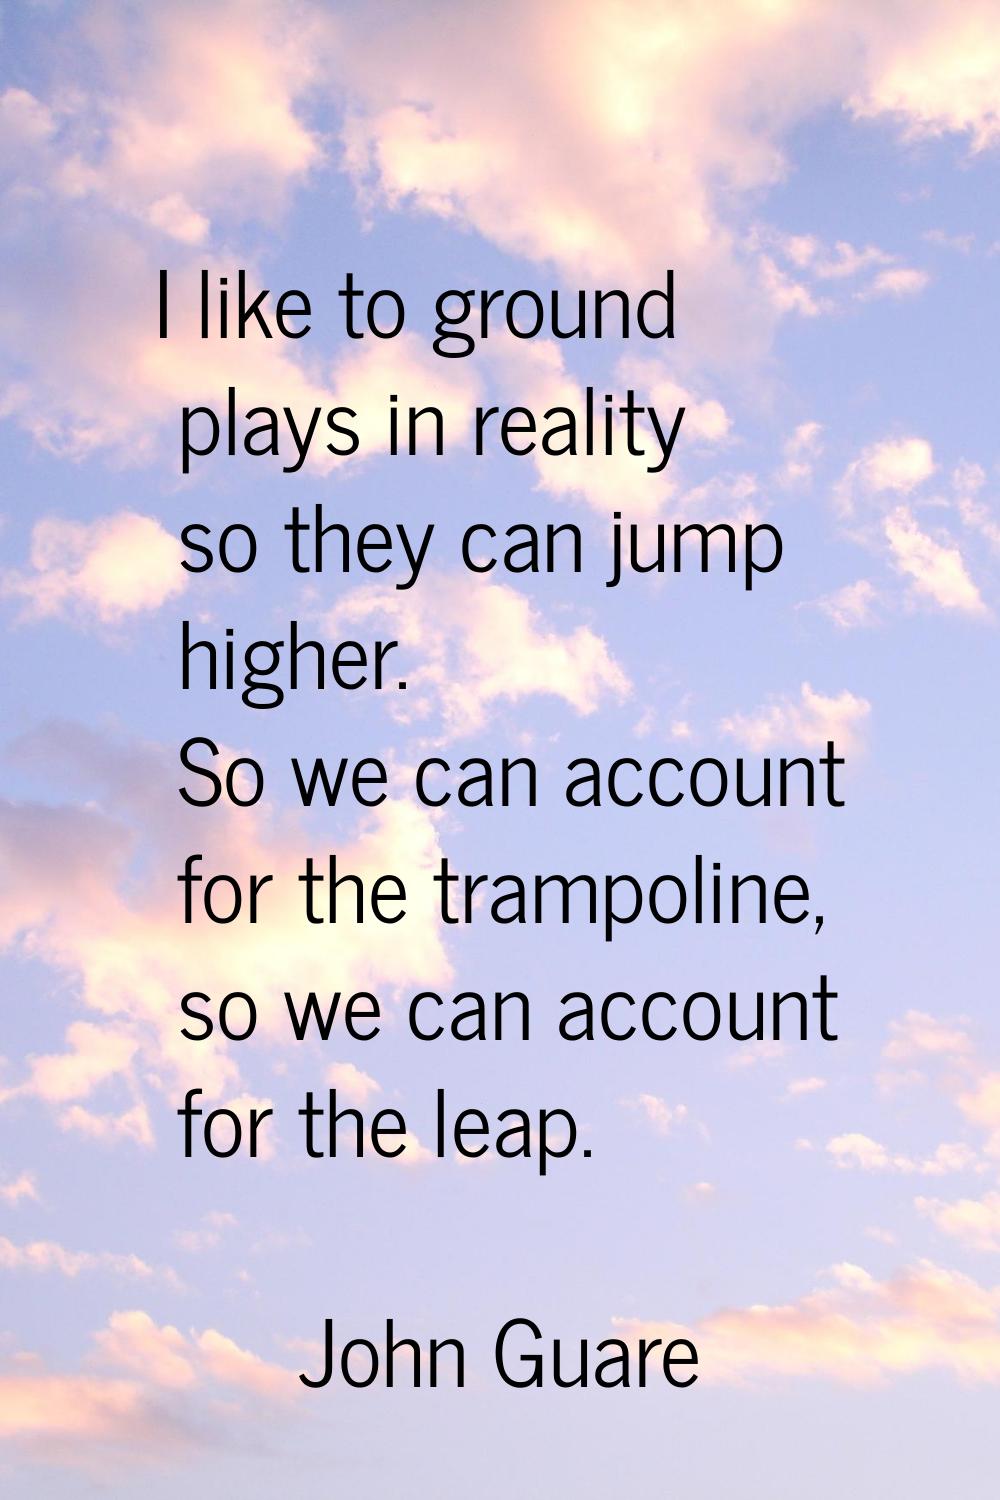 I like to ground plays in reality so they can jump higher. So we can account for the trampoline, so